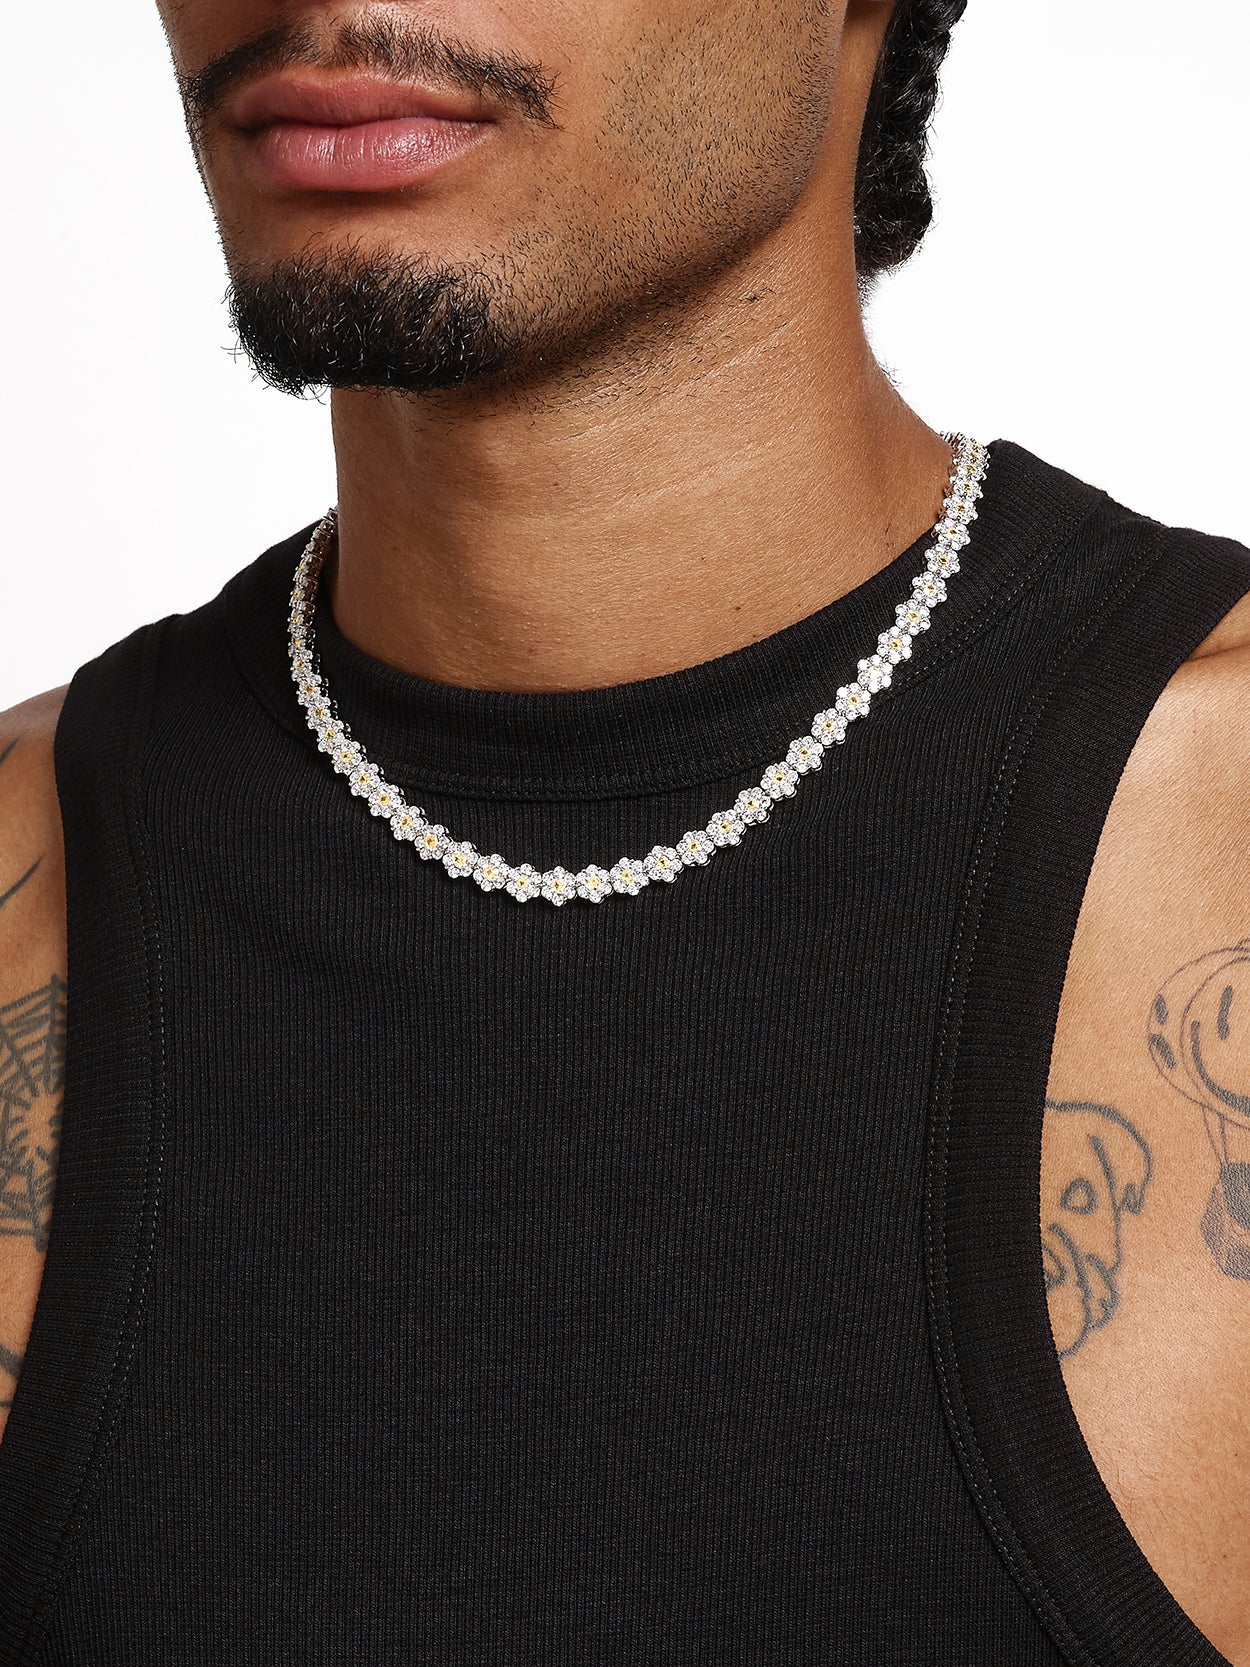 unique accessories for men. Man with mustache wearing black tank top and yellow daisy tennis chain